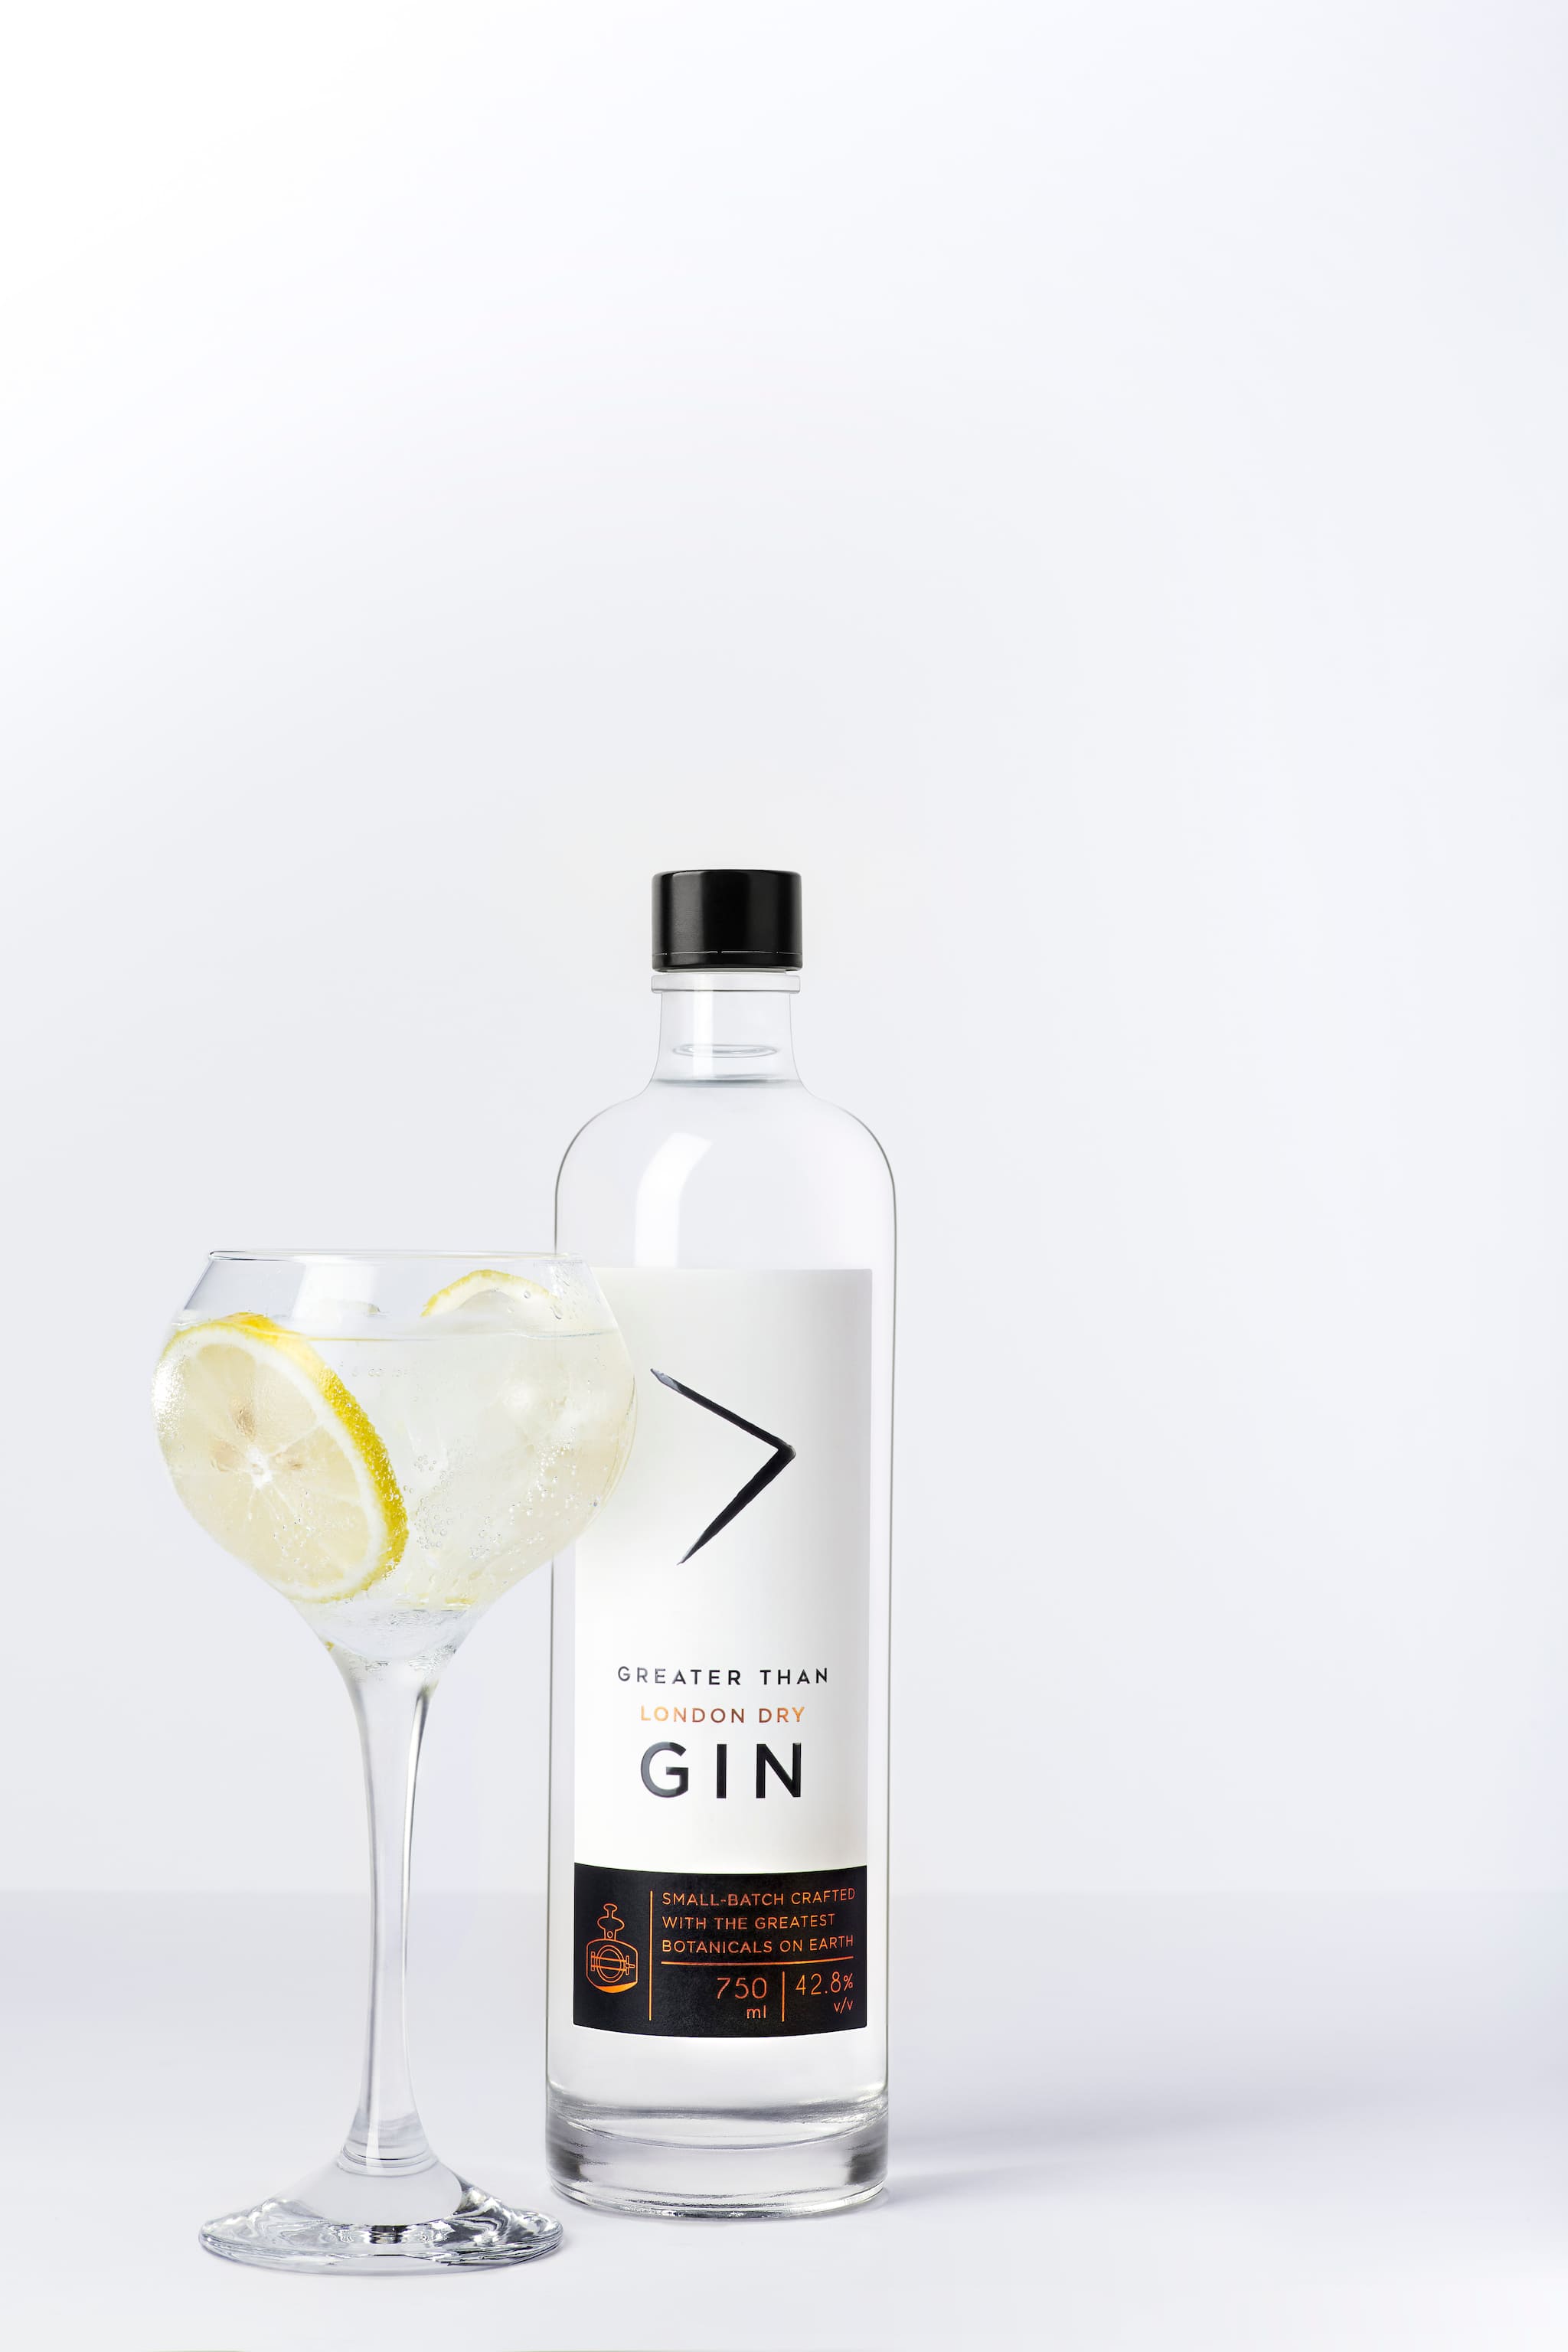 Greater Than gin was launched in 2017.